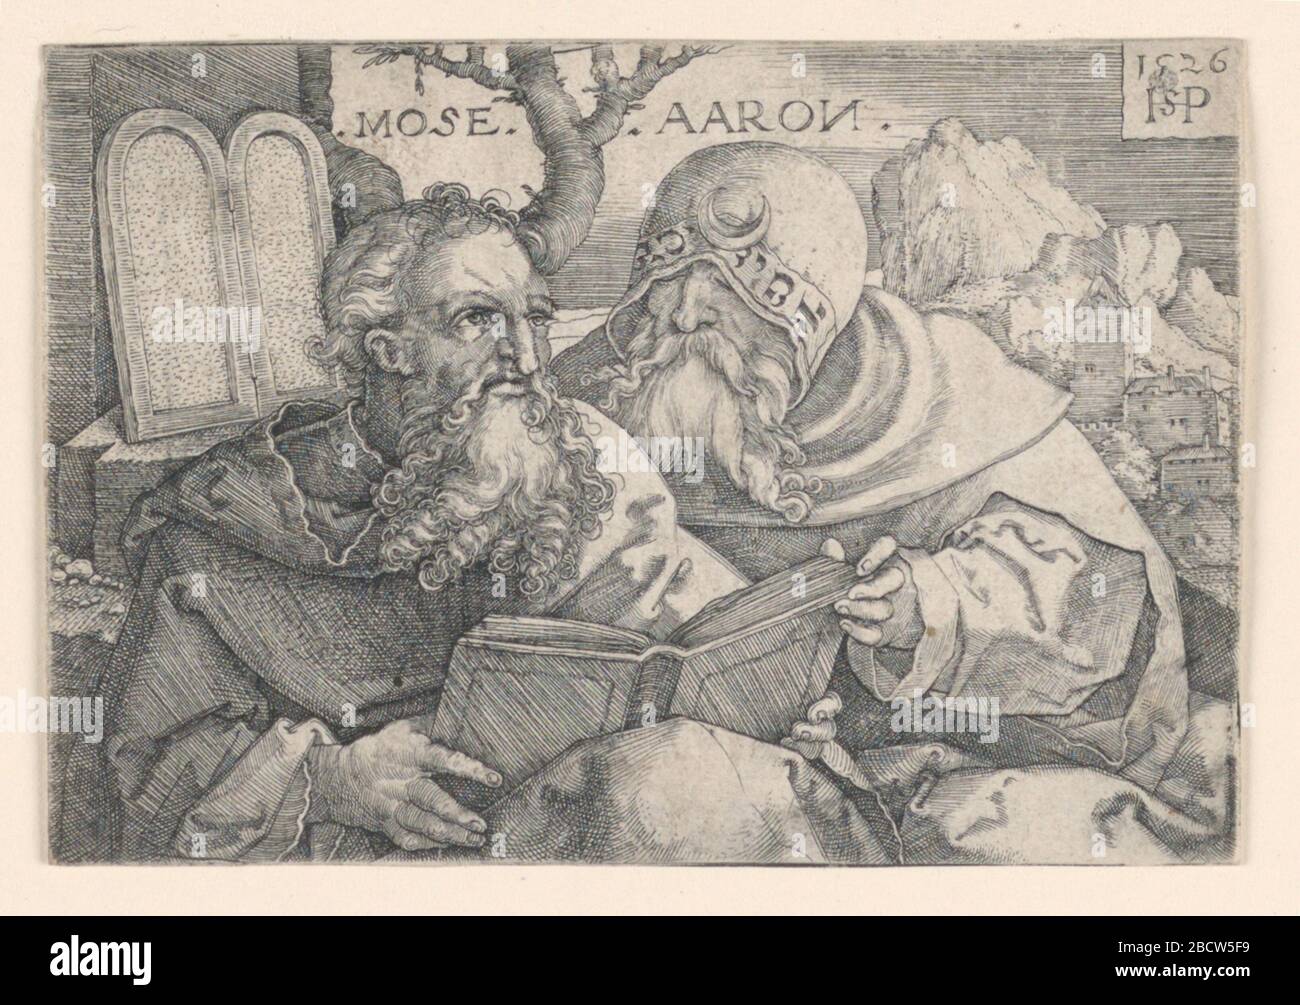 Moses and Aaron. Research in ProgressFigures of Moses, at left, and Aaron, at right, are represented reading a book which they hold together. Both are shown as seated and half-length figures. The Tables of The Law (Ten Commandments) are seen, upper left. A mountain village, upper right. Moses and Aaron Stock Photo